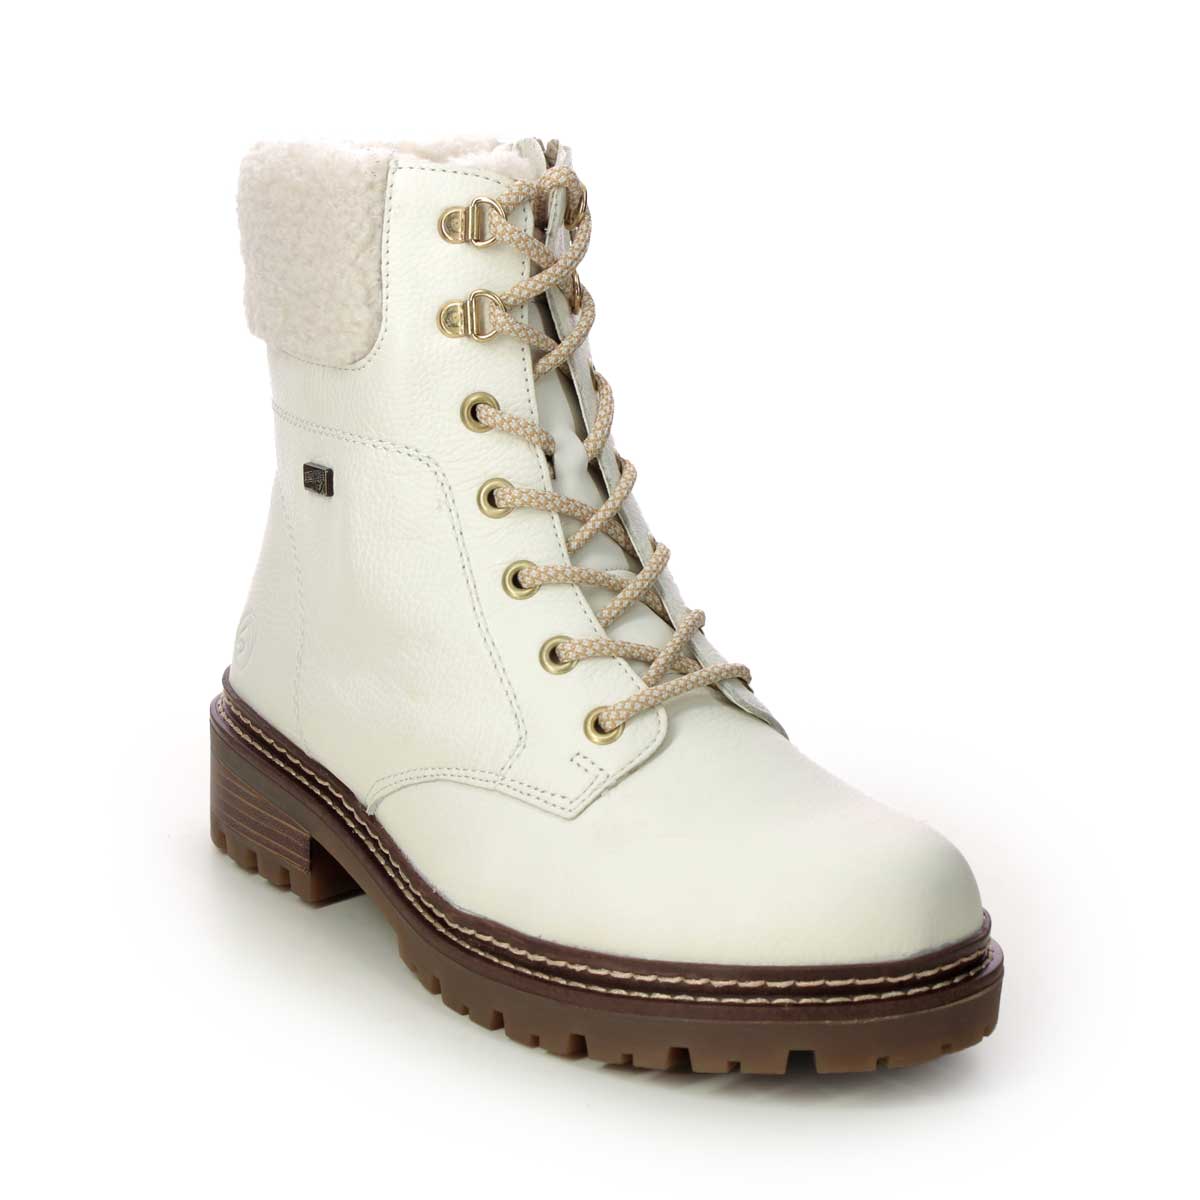 Remonte Astra Teddy Tex White Leather Womens Winter Boots D0B74-81 In Size 41 In Plain White Leather